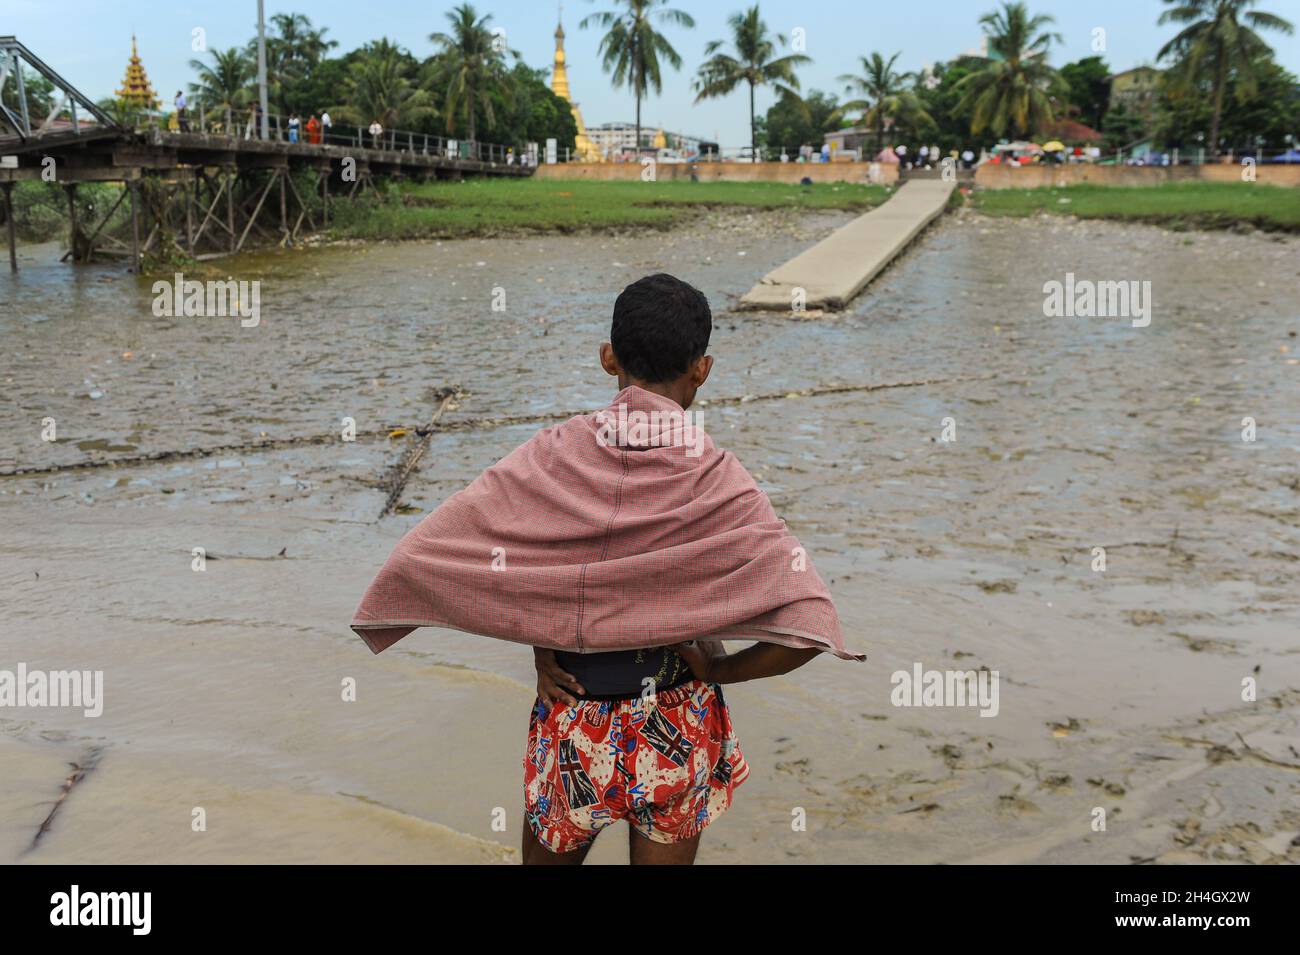 11.11.2015, Yangon, Myanmar, Asia - A man is seen standing opposite the Botataung jetty at the waterfront by the Yangon River (Hlaing River). Stock Photo